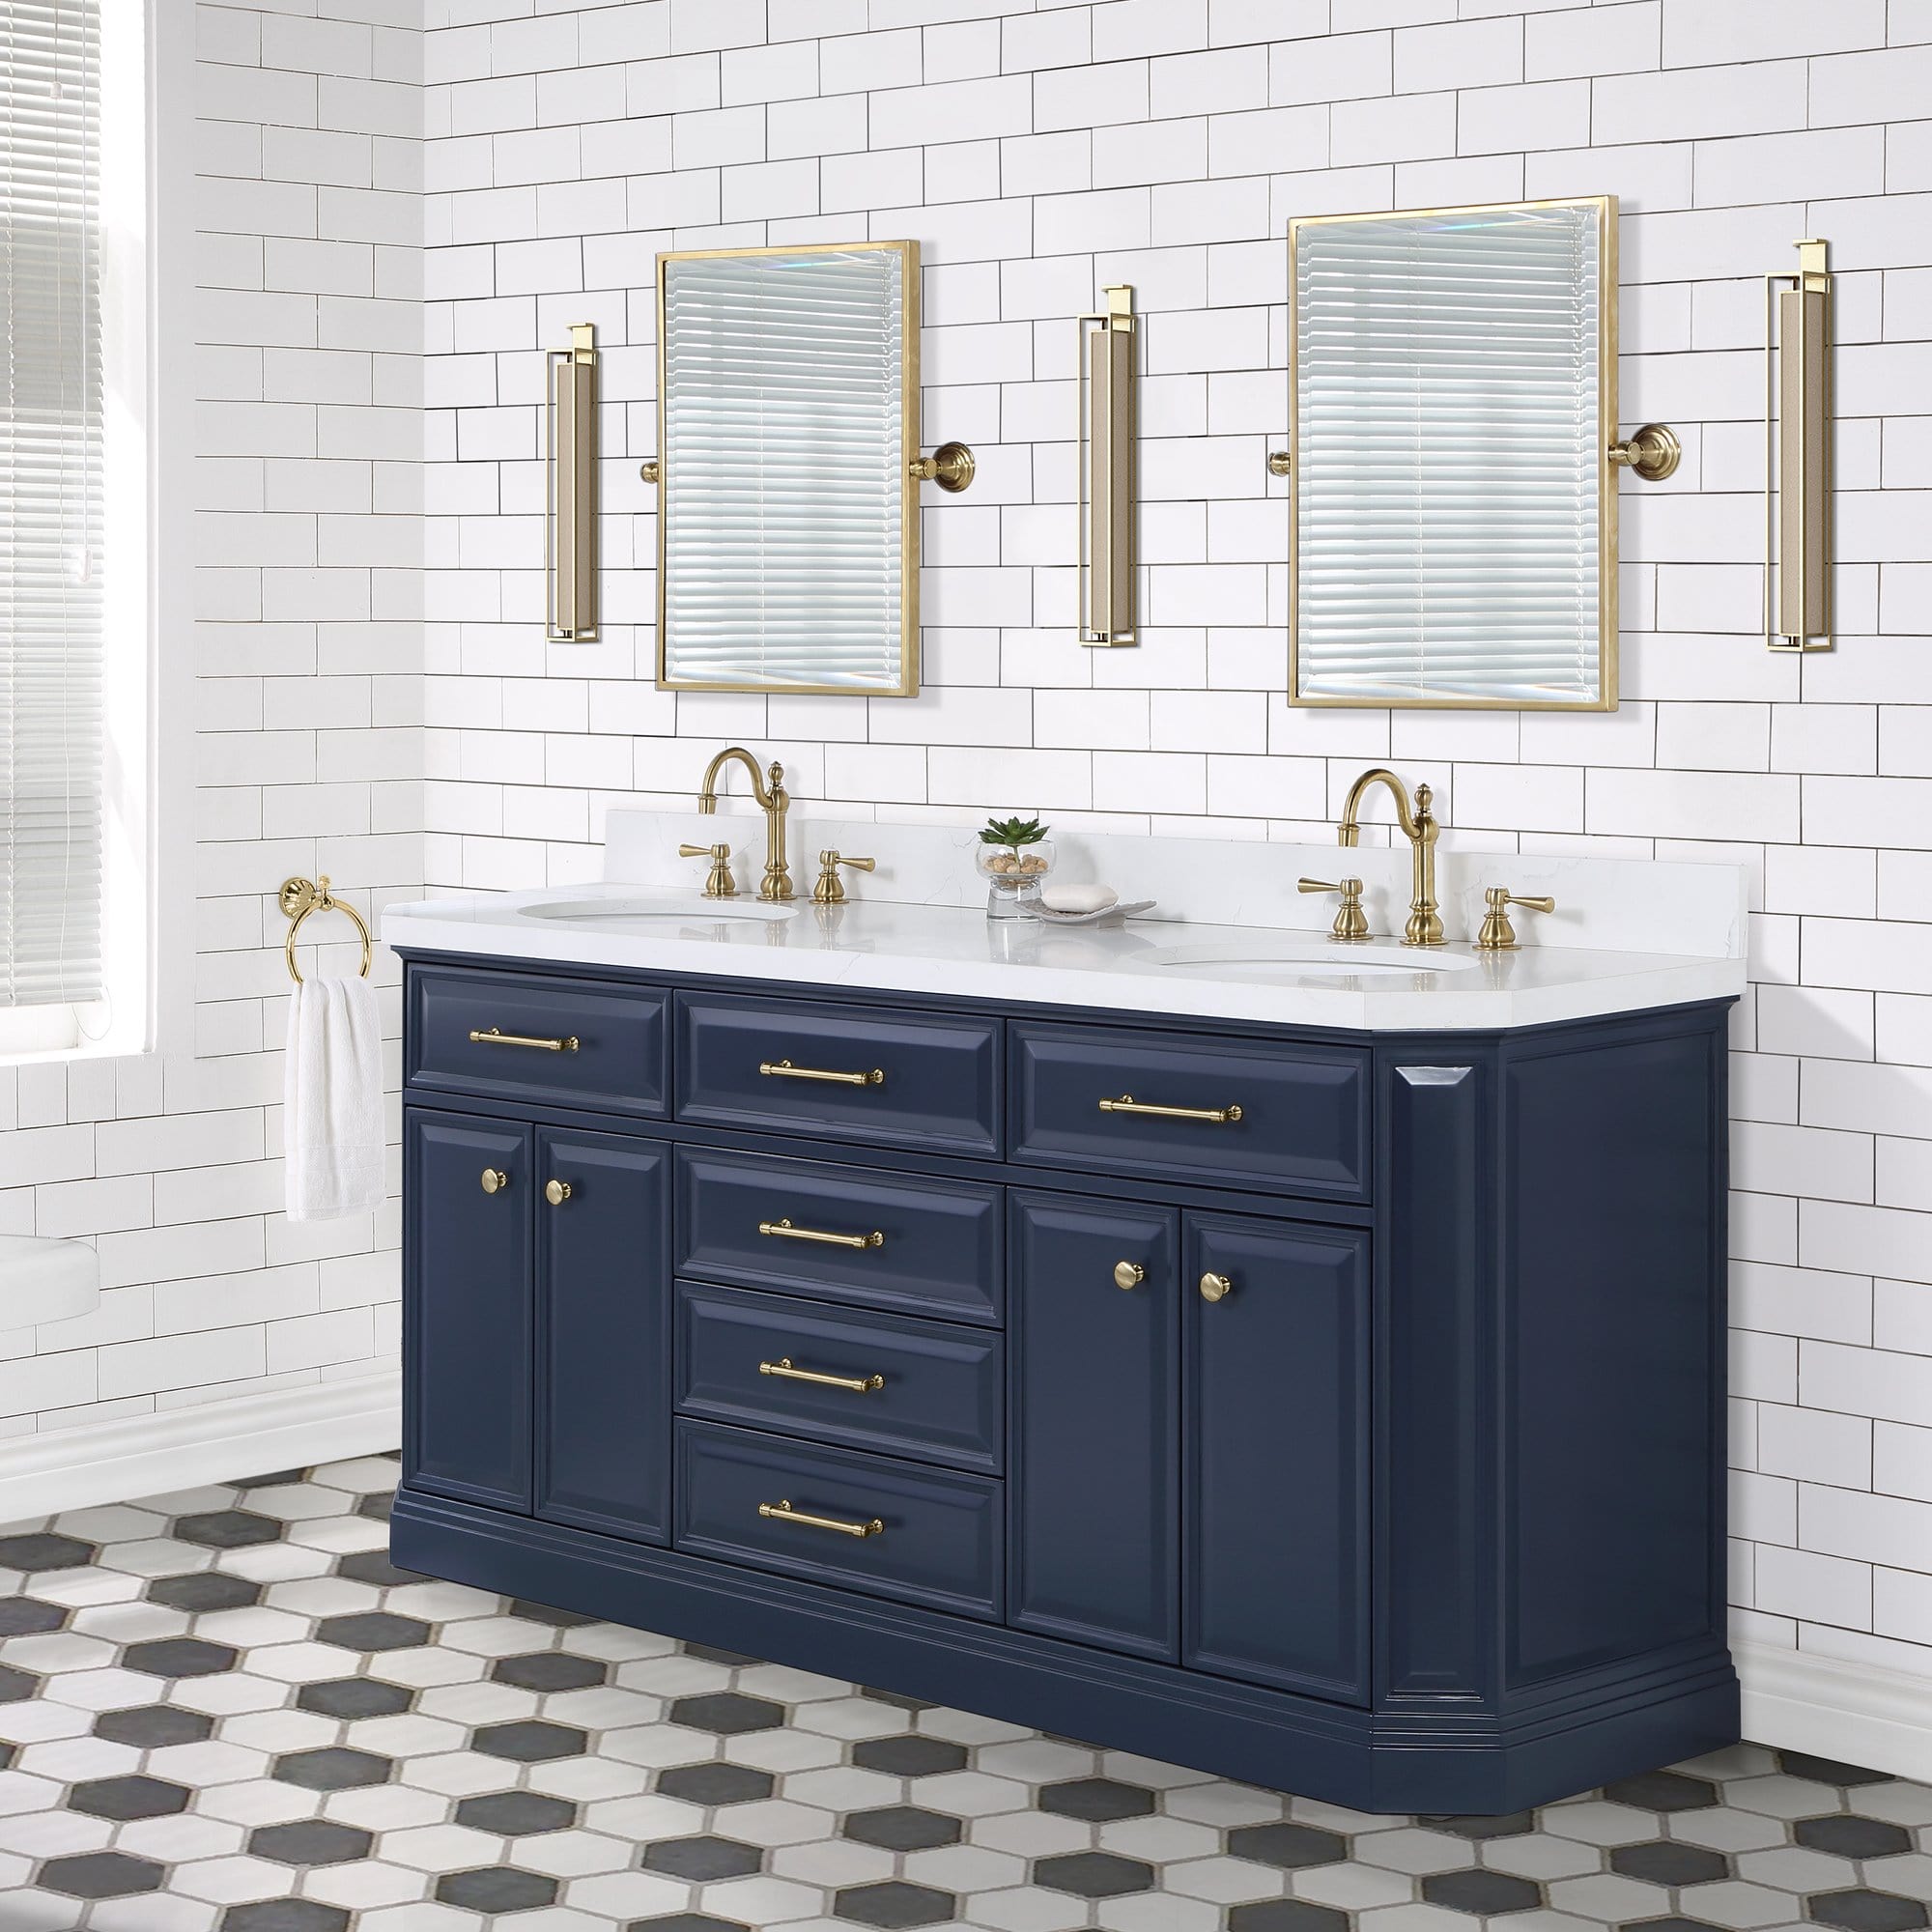 Water Creation Palace 72 In. Double Sink White Quartz Countertop Vanity in Monarch Blue and Mirrors - Molaix732030765047Bathroom vanityPA72QZ06MB-E18000000